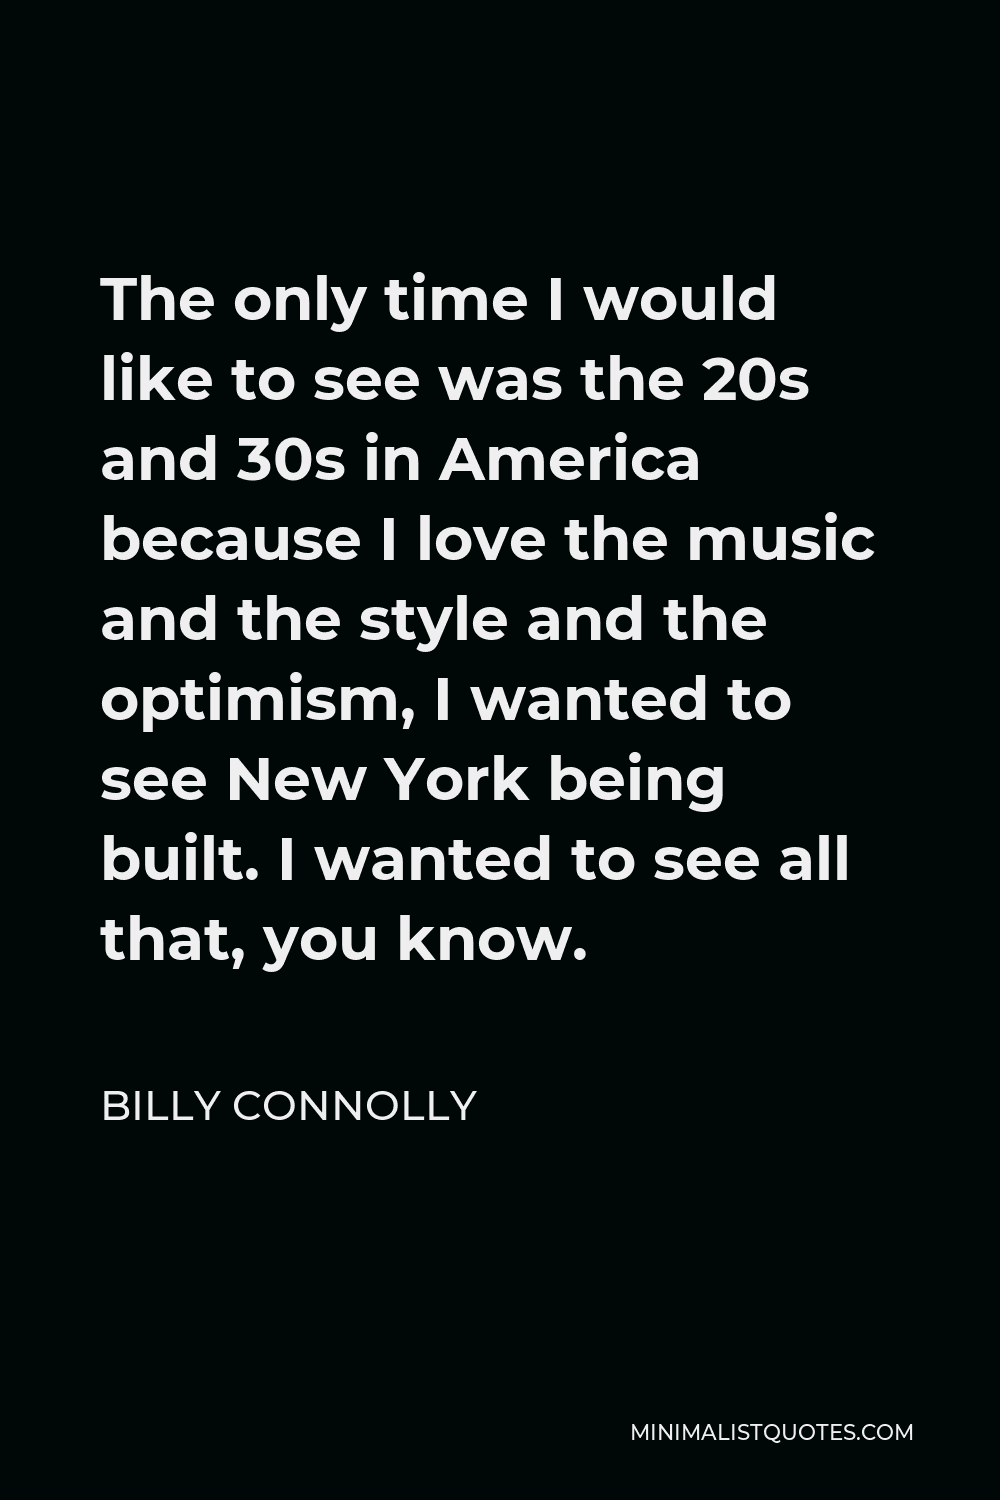 Billy Connolly Quote - The only time I would like to see was the 20s and 30s in America because I love the music and the style and the optimism, I wanted to see New York being built. I wanted to see all that, you know.